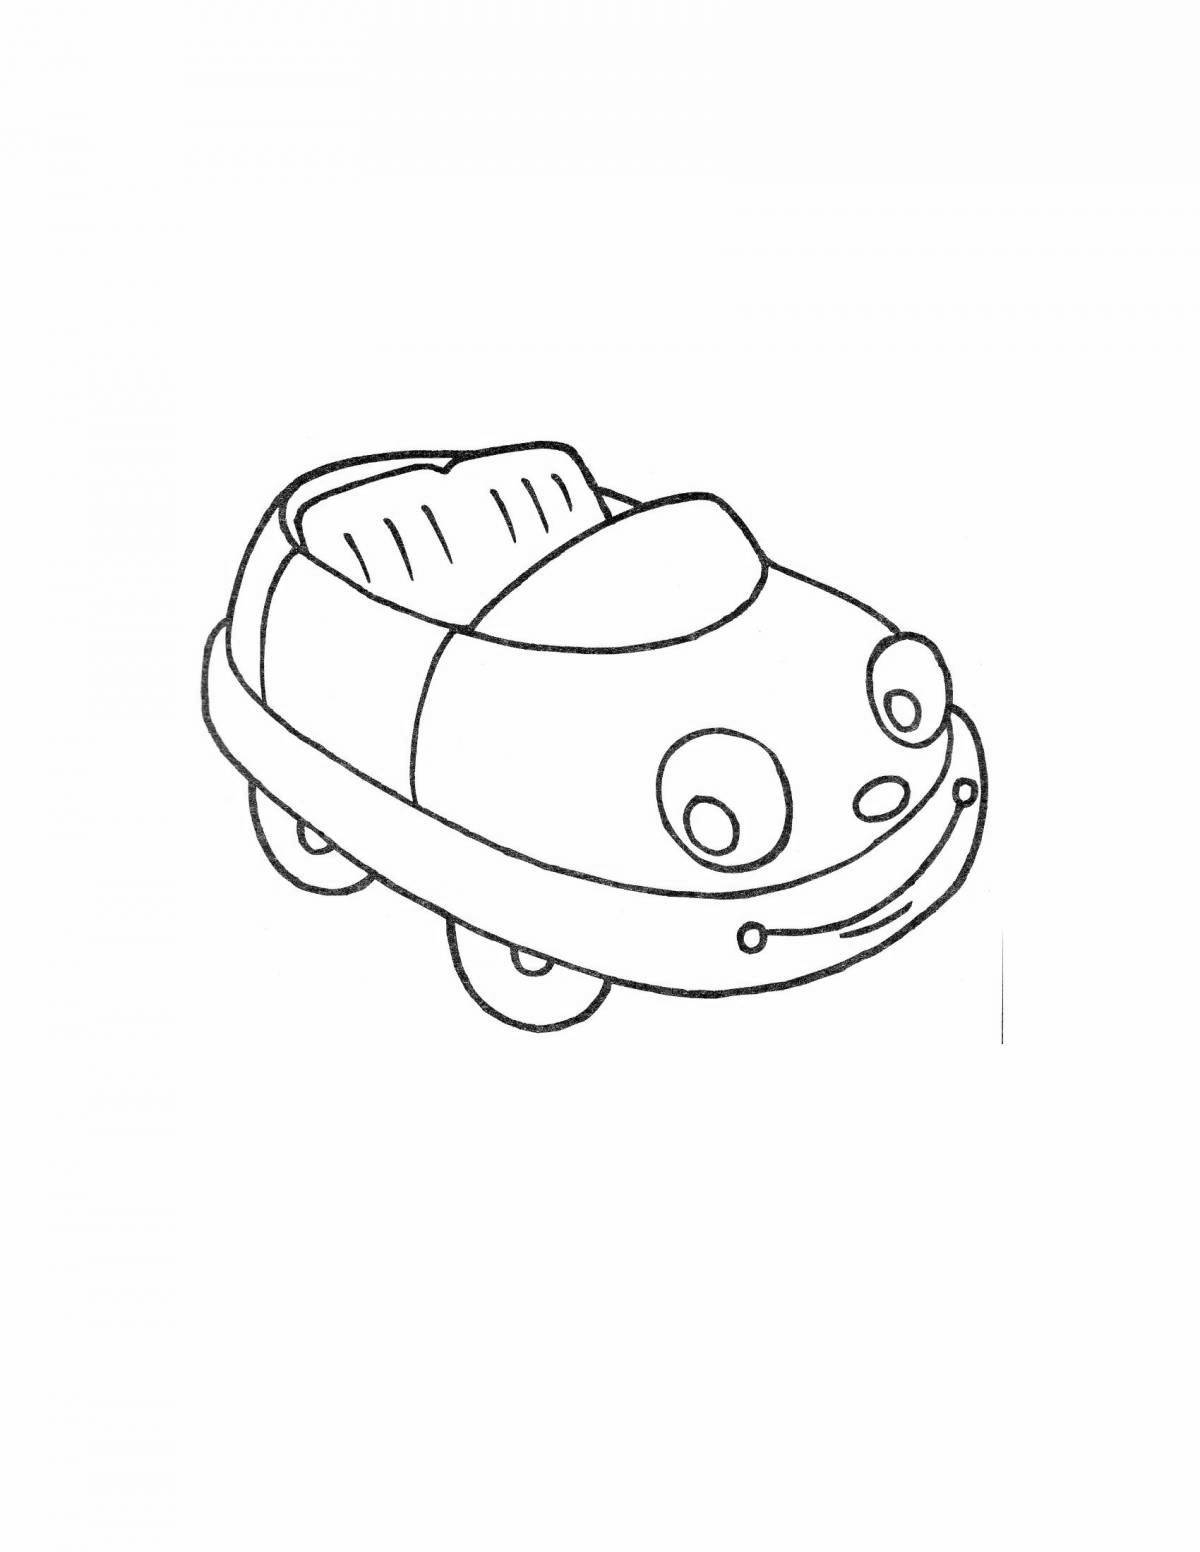 Coloring book glowing toy car